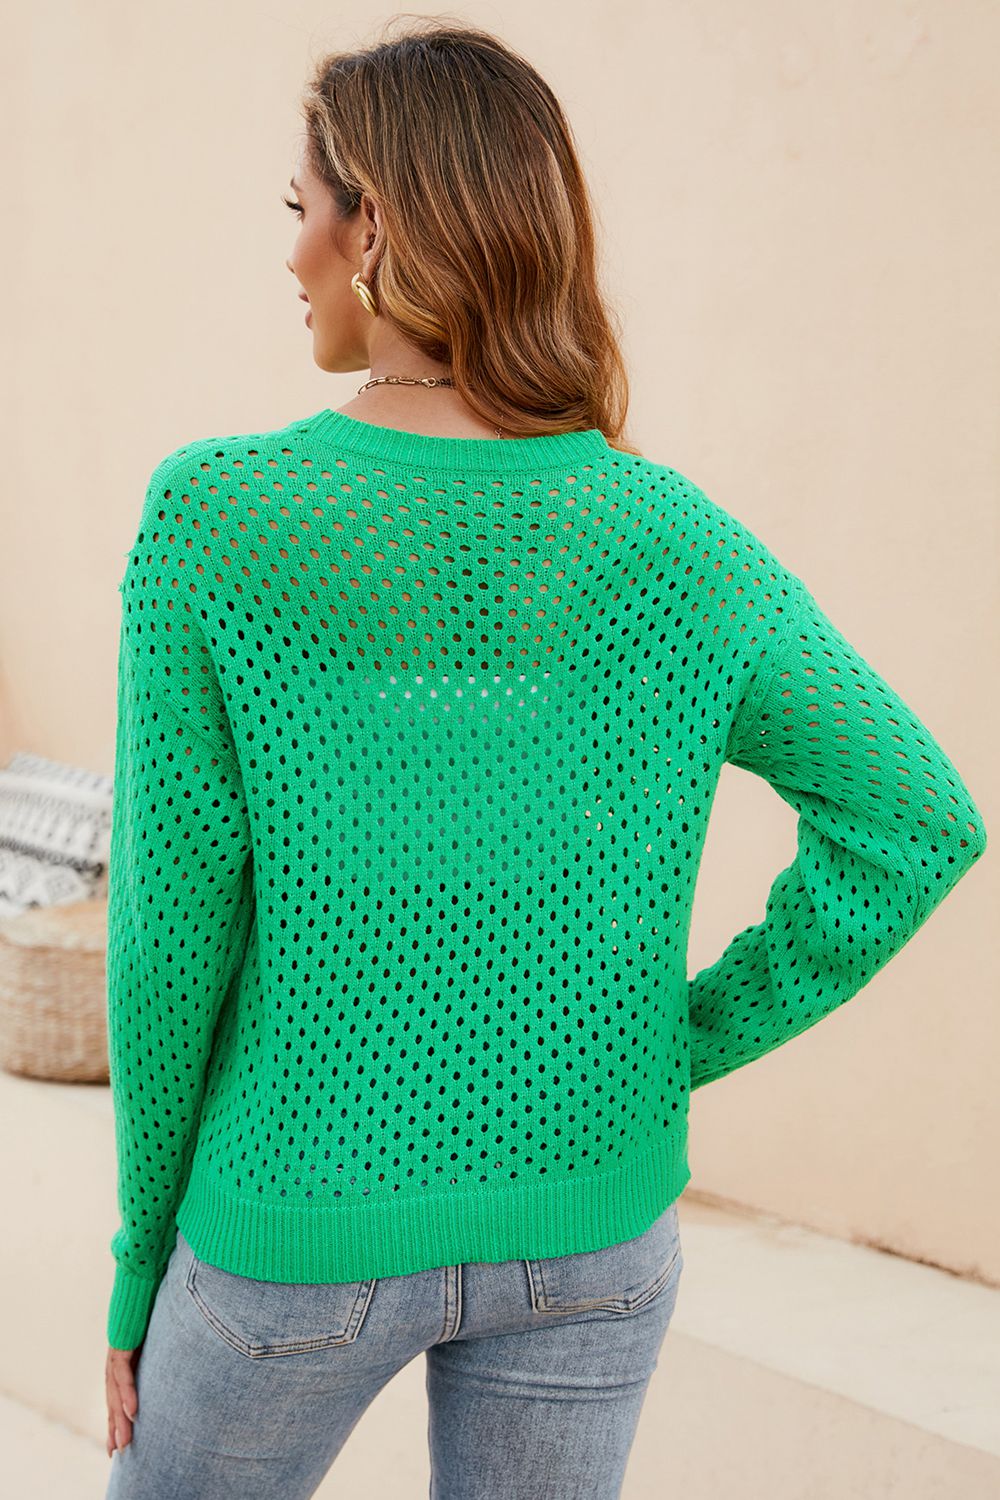 Beauteous Round Neck Openwork Dropped Shoulder Knit Top